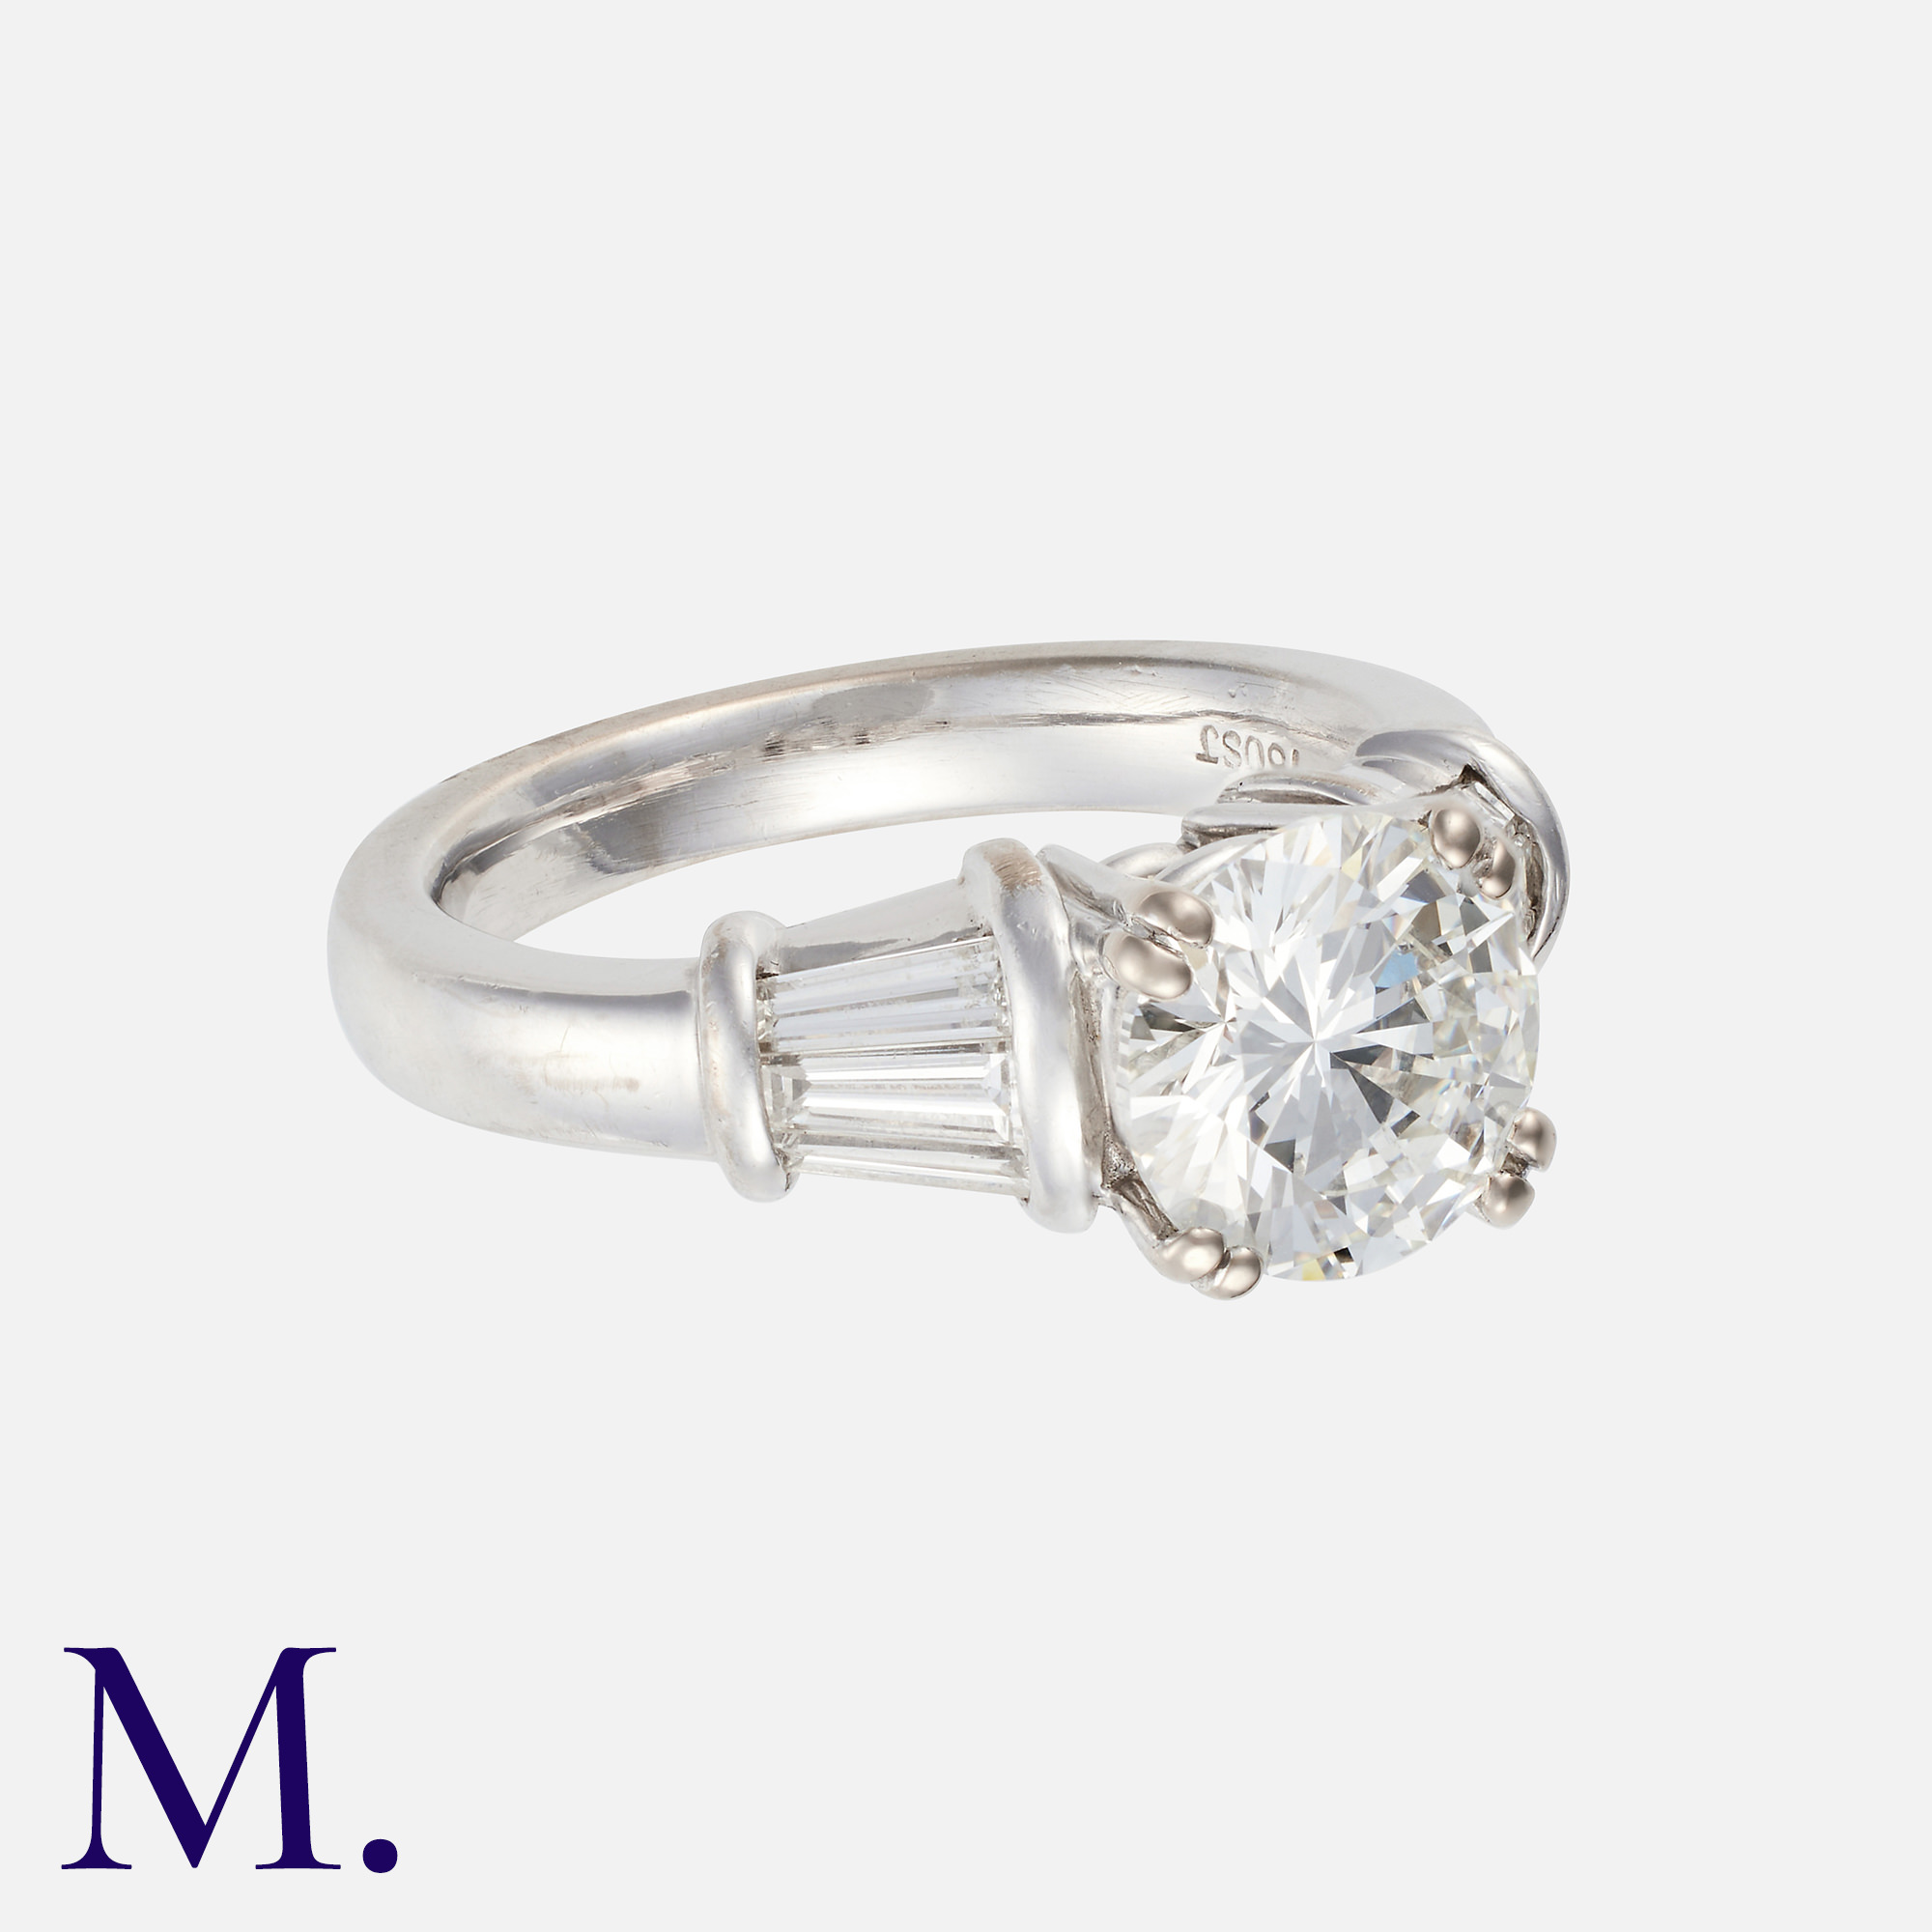 A Diamond Ring in 18K white gold, set with a 2.0ct round brilliant cut diamond (I colour; VVS1) with - Image 2 of 2